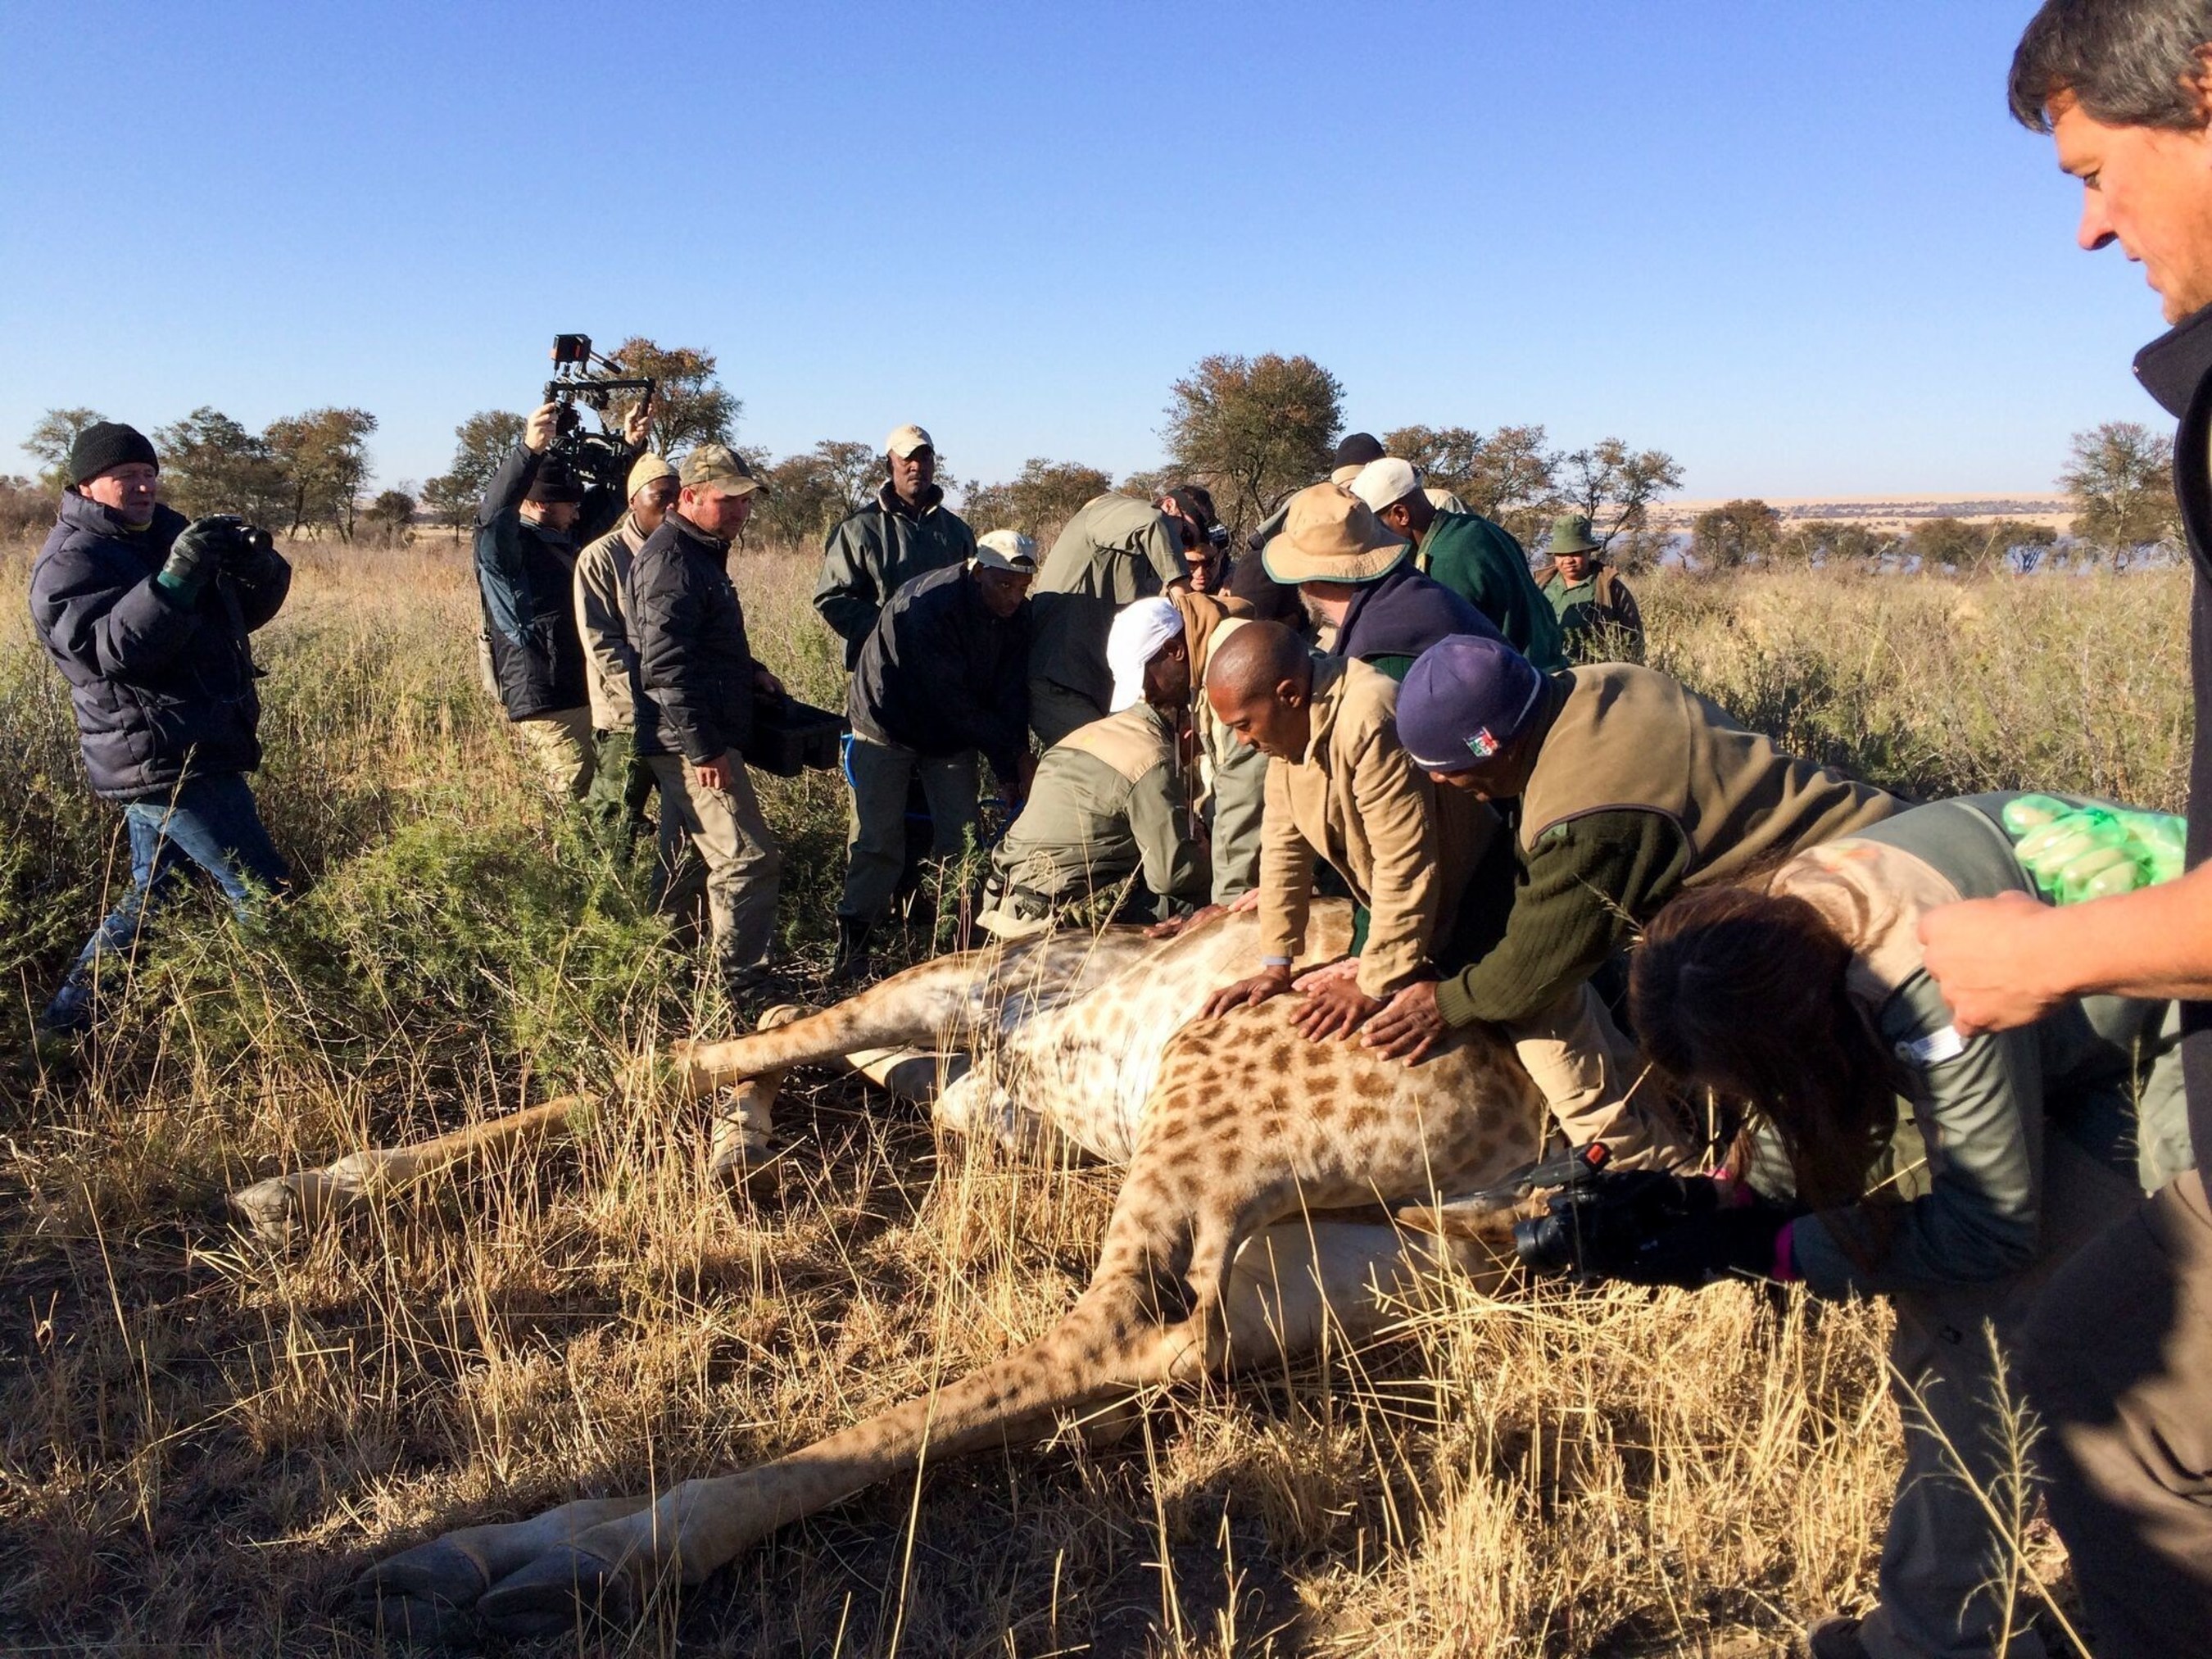 South Africa University of the Free State lecturer in wildlife management Dr. Francois Deacon collars a wild giraffe with a GPS tracking device. Collars and ear tags help Deacon silently follow wild giraffe in Africa to learn of habits that may be leading to their decline.